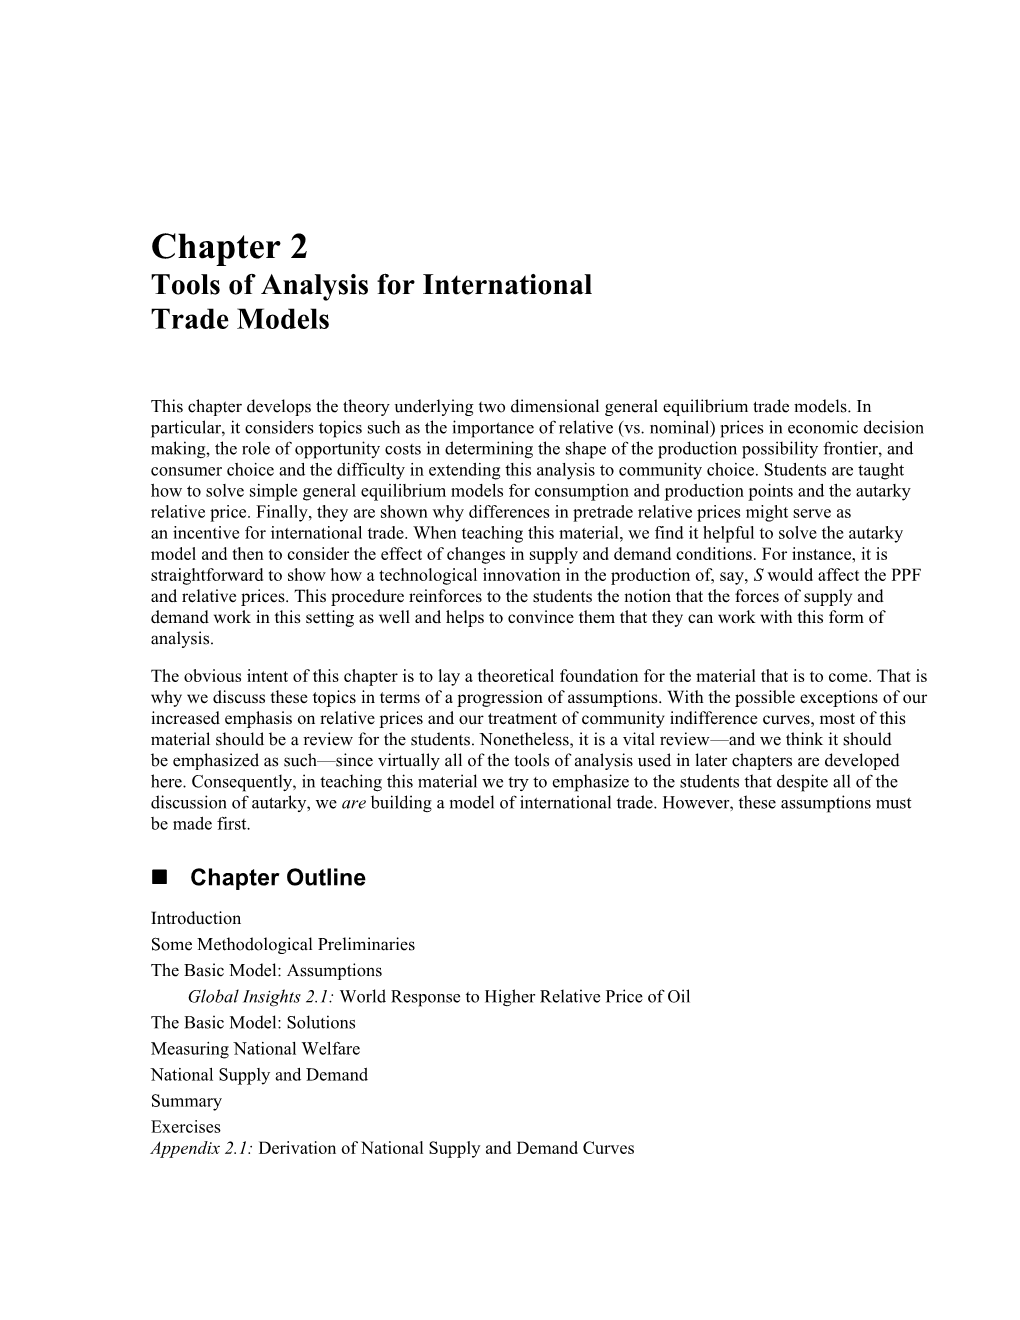 Chapter 2 Tools of Analysis for International Trade Models